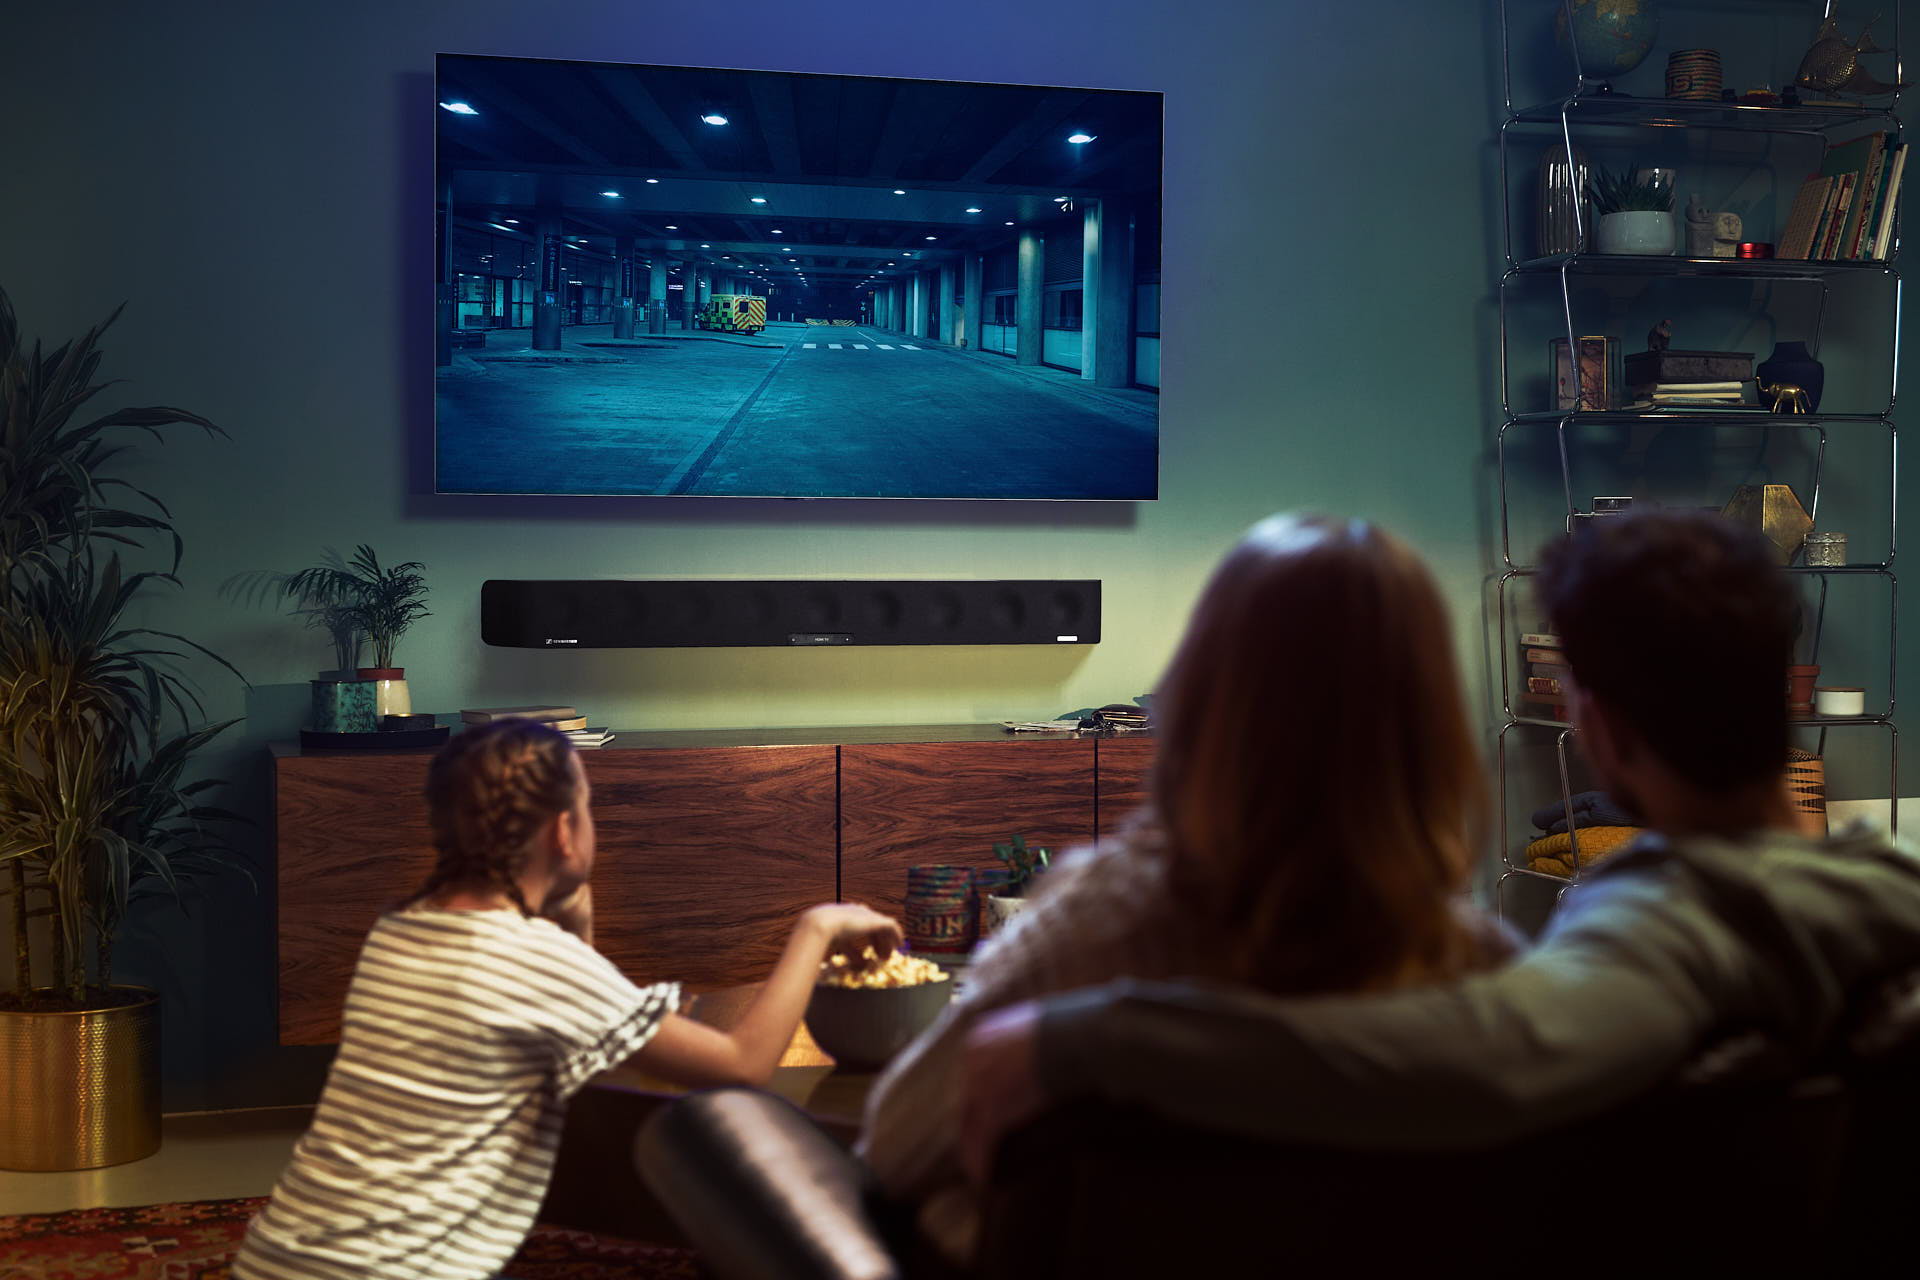 Sennheiser’s AMBEO Soundbar is designed to create an immersive 3D sound experience with just one device and transforms the living room into your very own cinema.